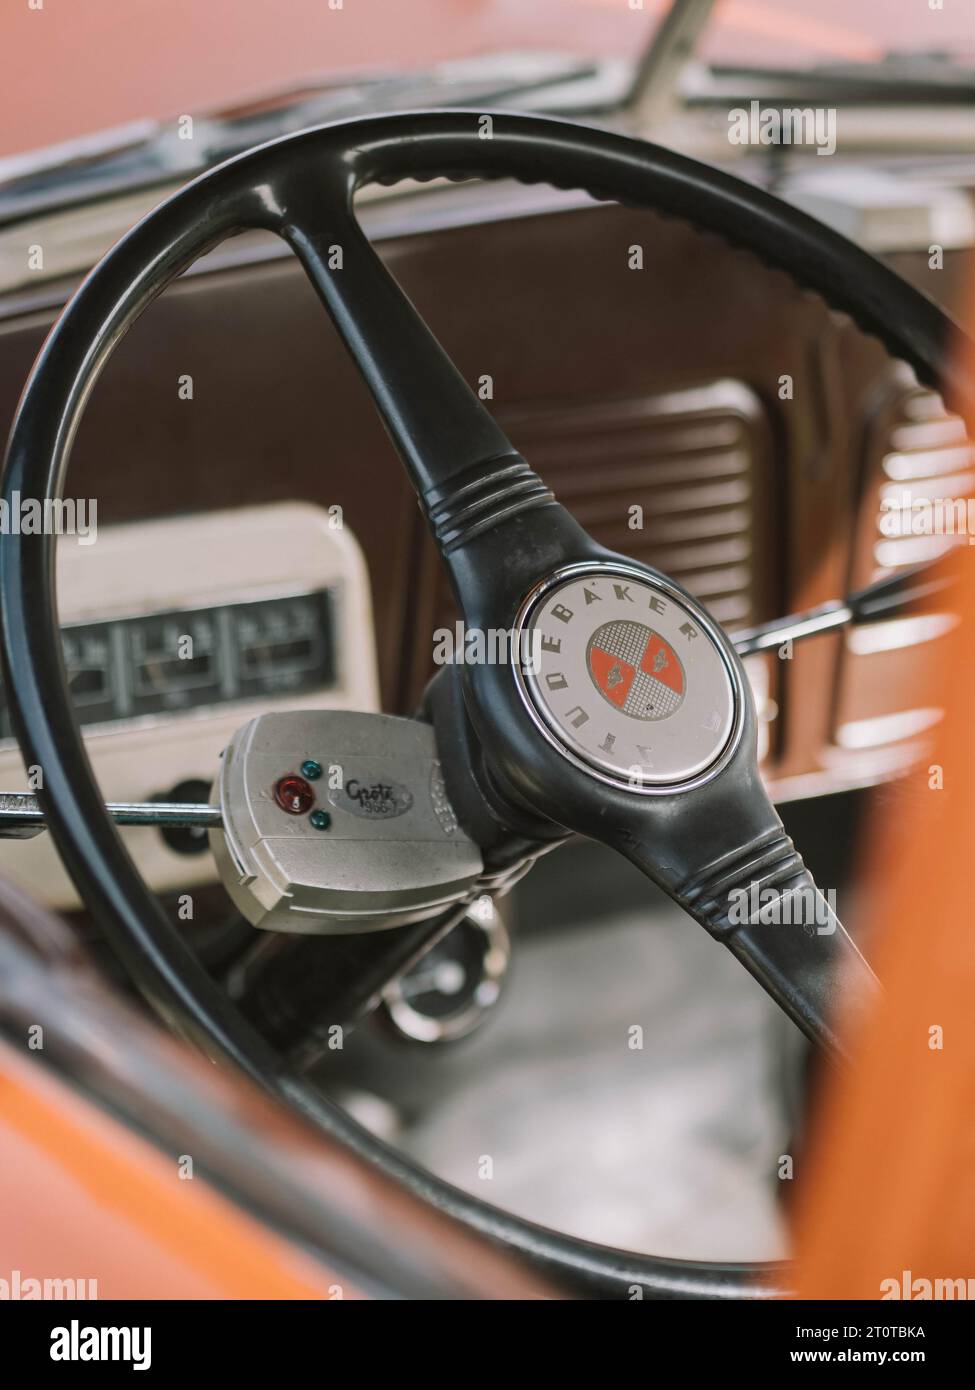 Dashboard detail, showing the logo on the steering wheel, of a 1950s Studebaker Hauler pickup truck Stock Photo